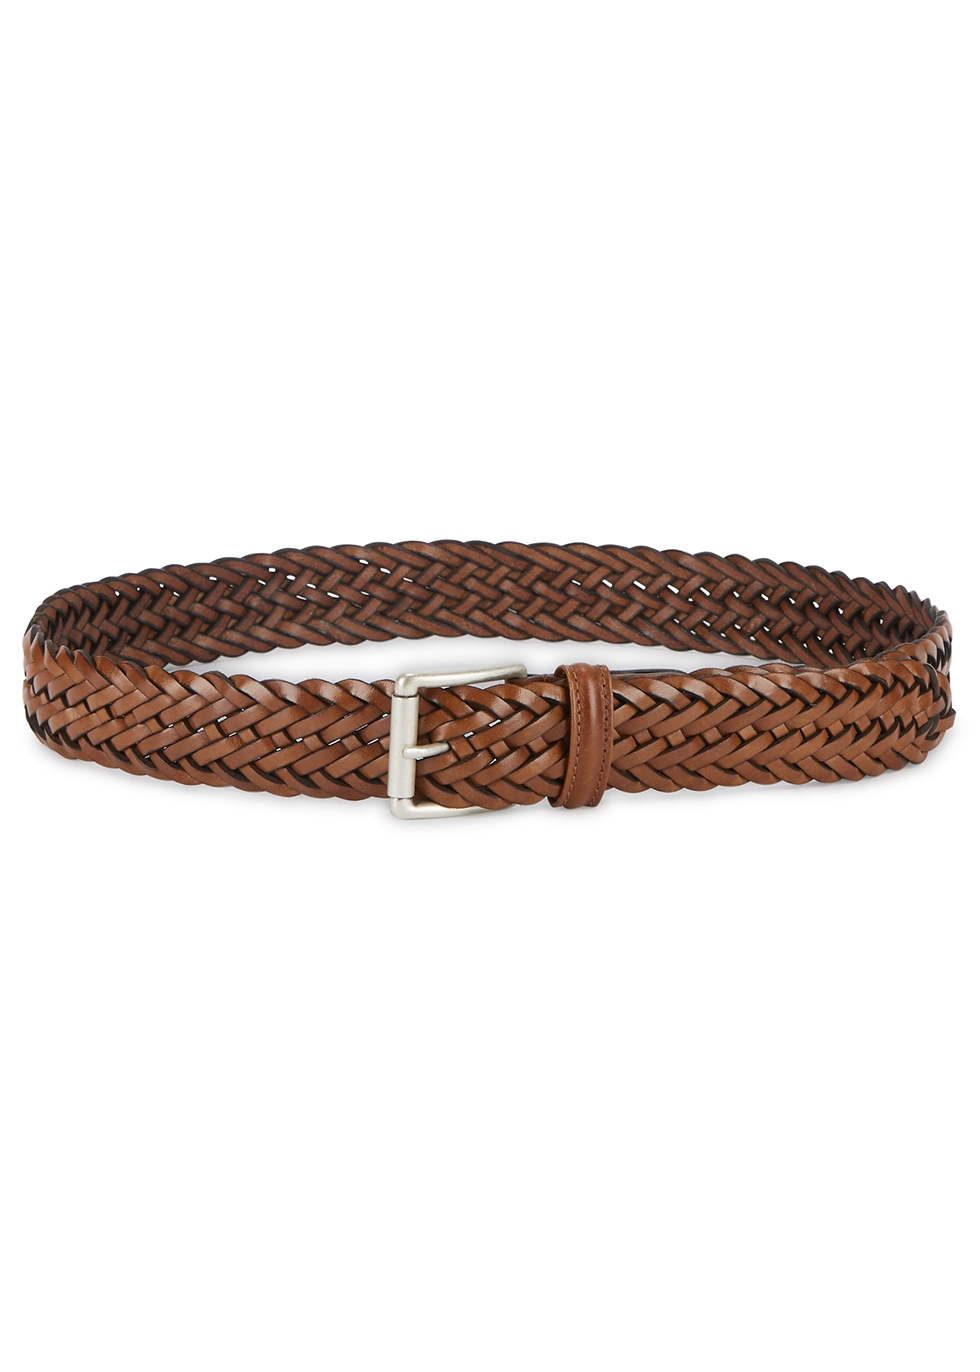 Brown woven leather belt